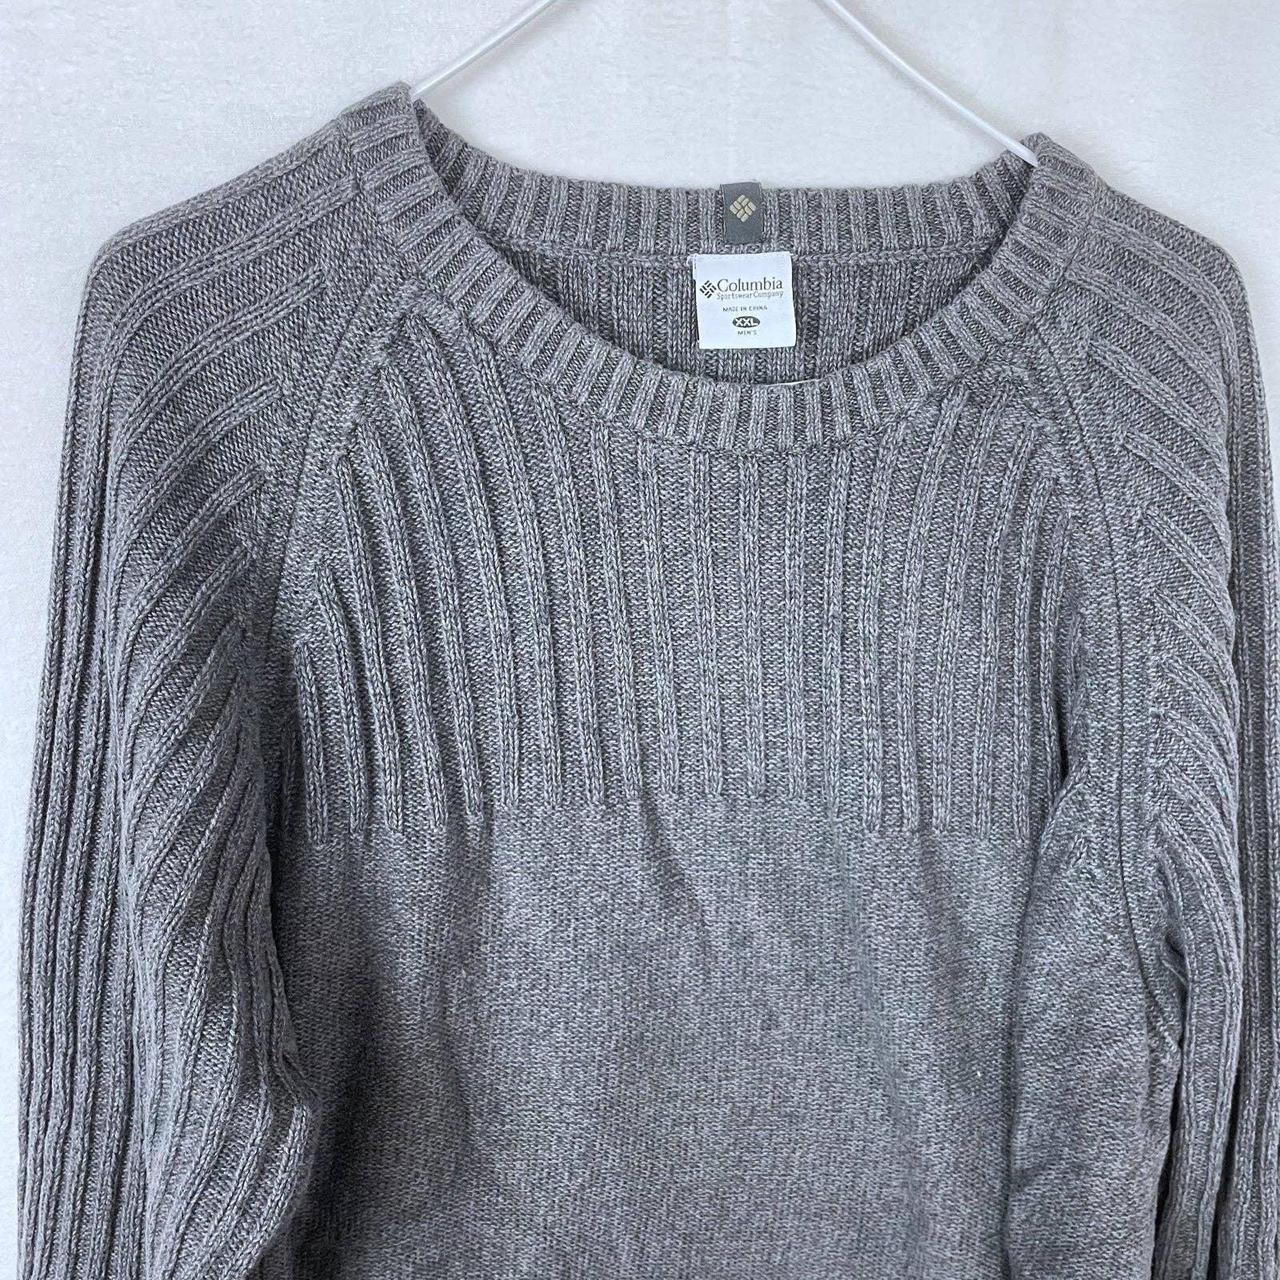 Product Image 3 - Gray Mens Columbia Knit Sweater.